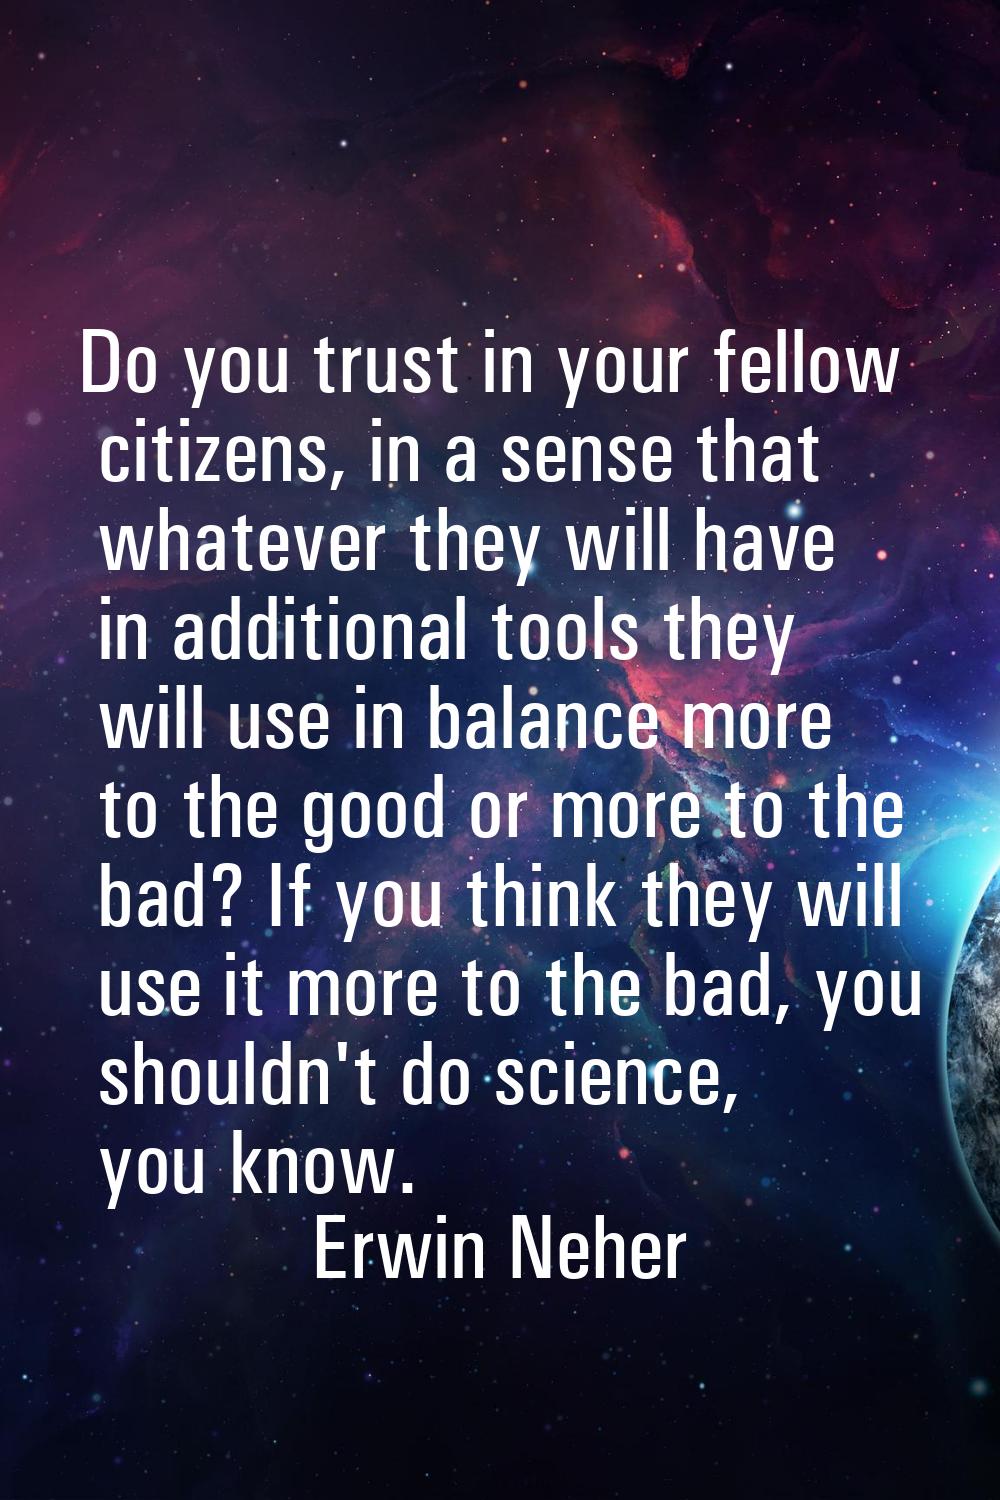 Do you trust in your fellow citizens, in a sense that whatever they will have in additional tools t